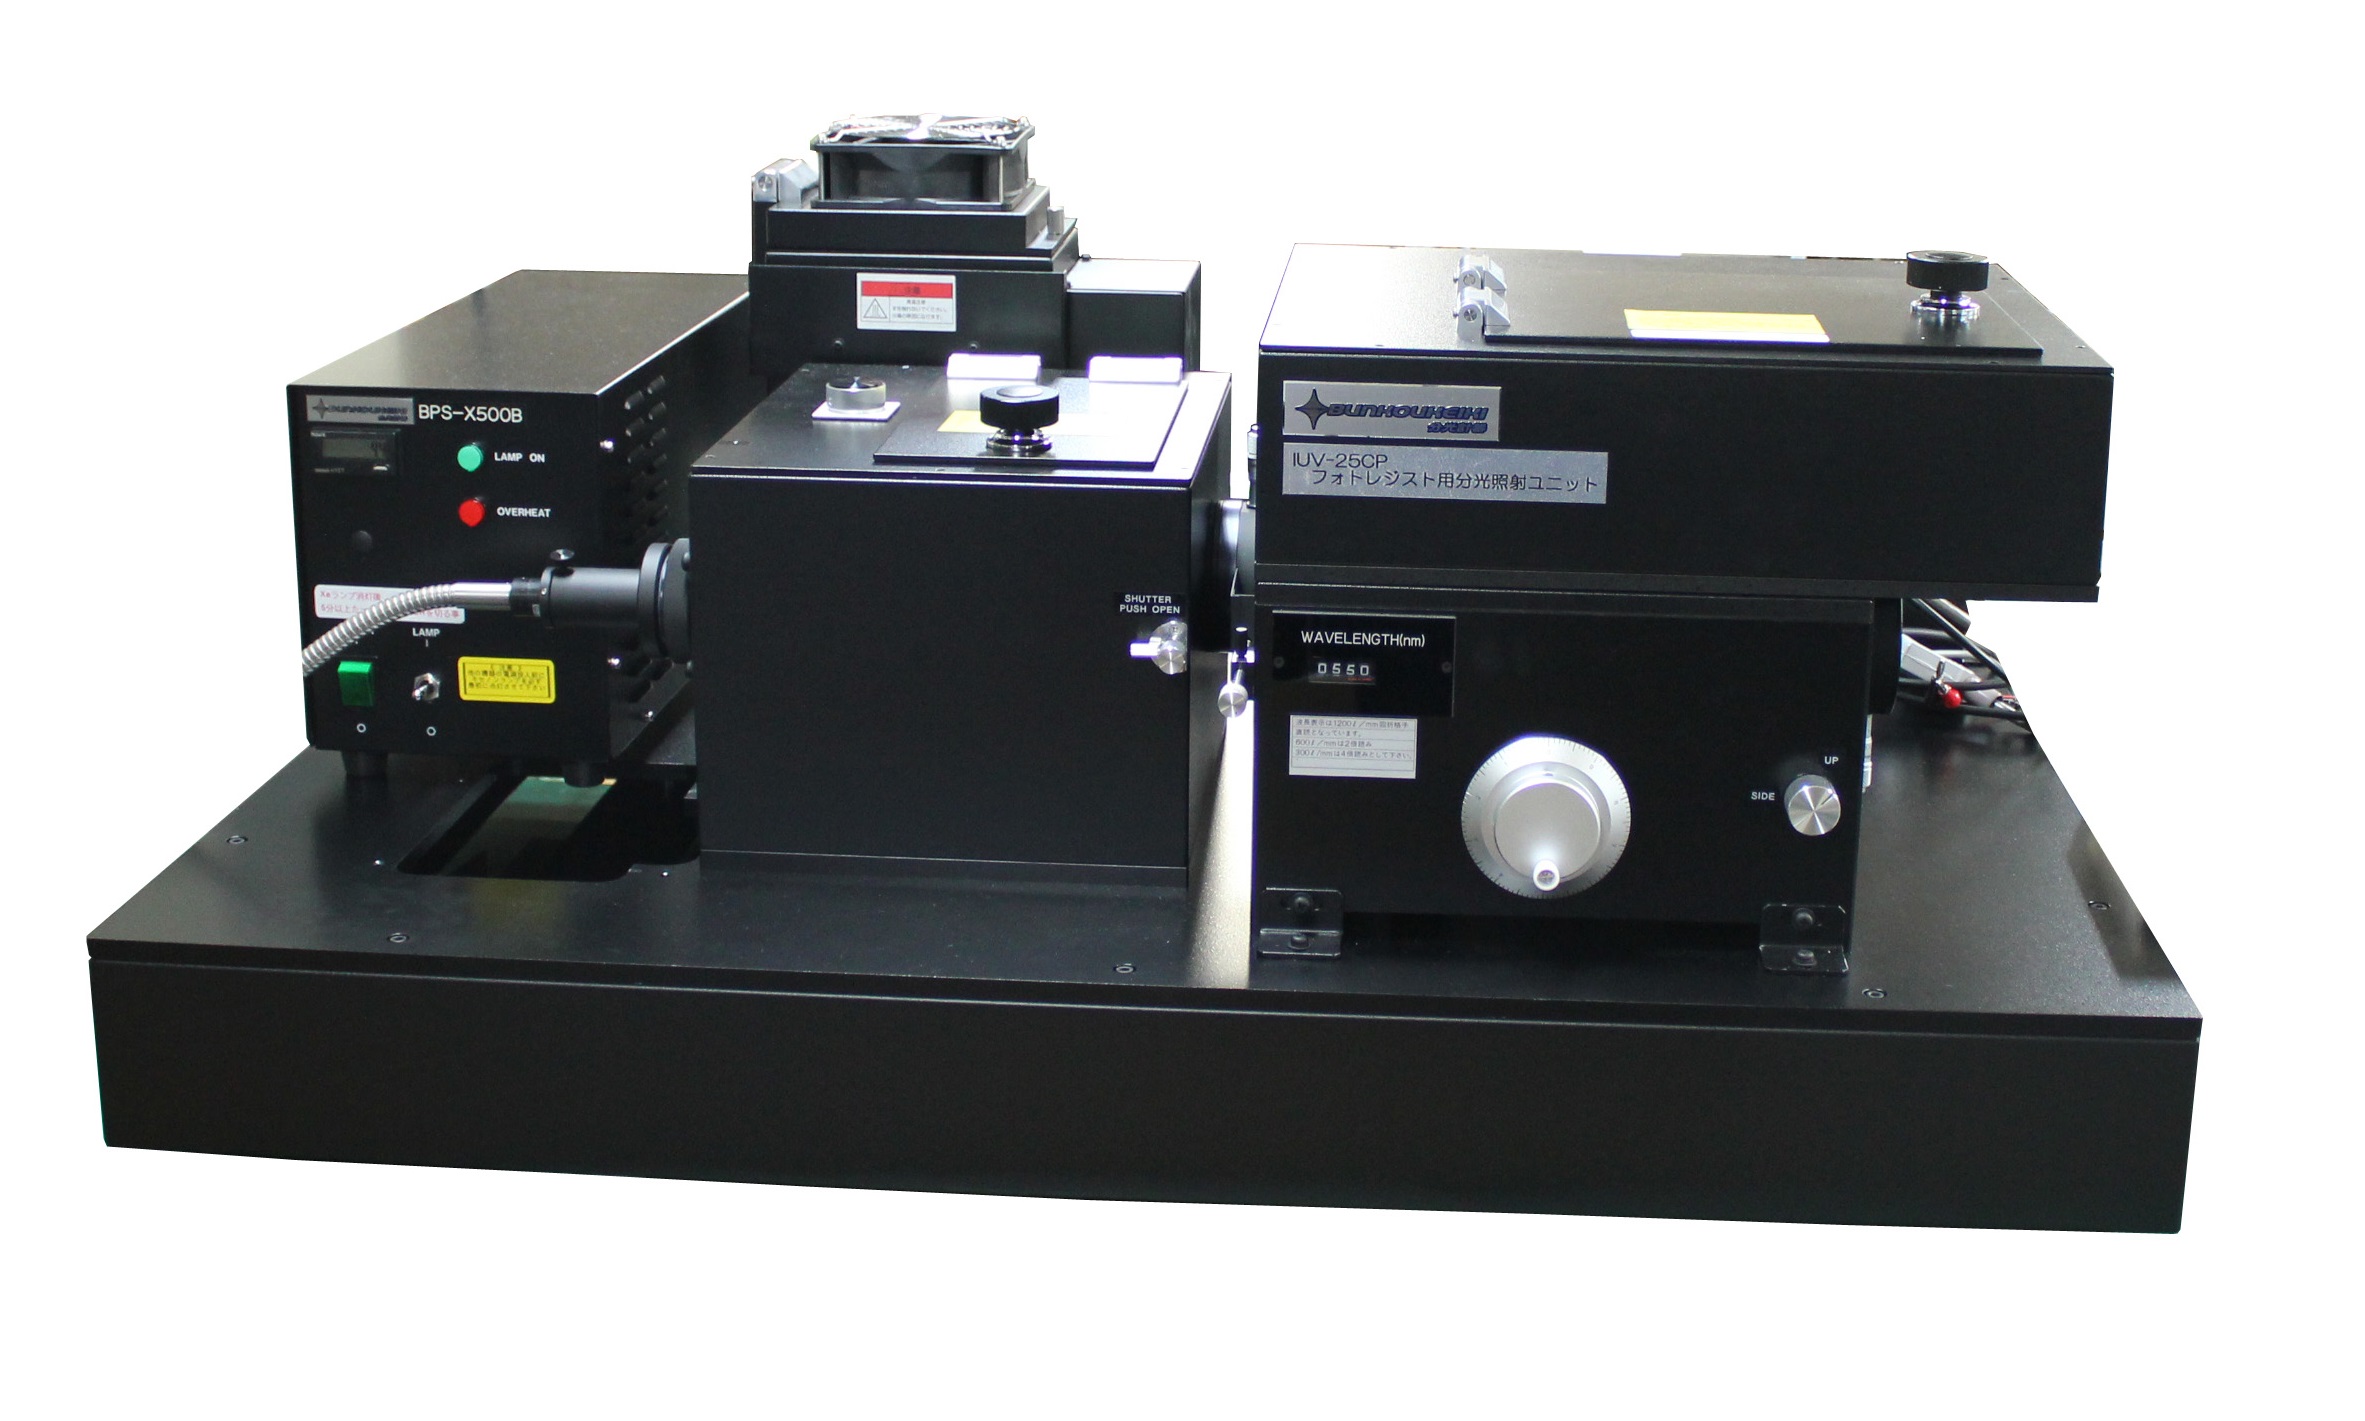 Spectral irradiation unit for photoresist